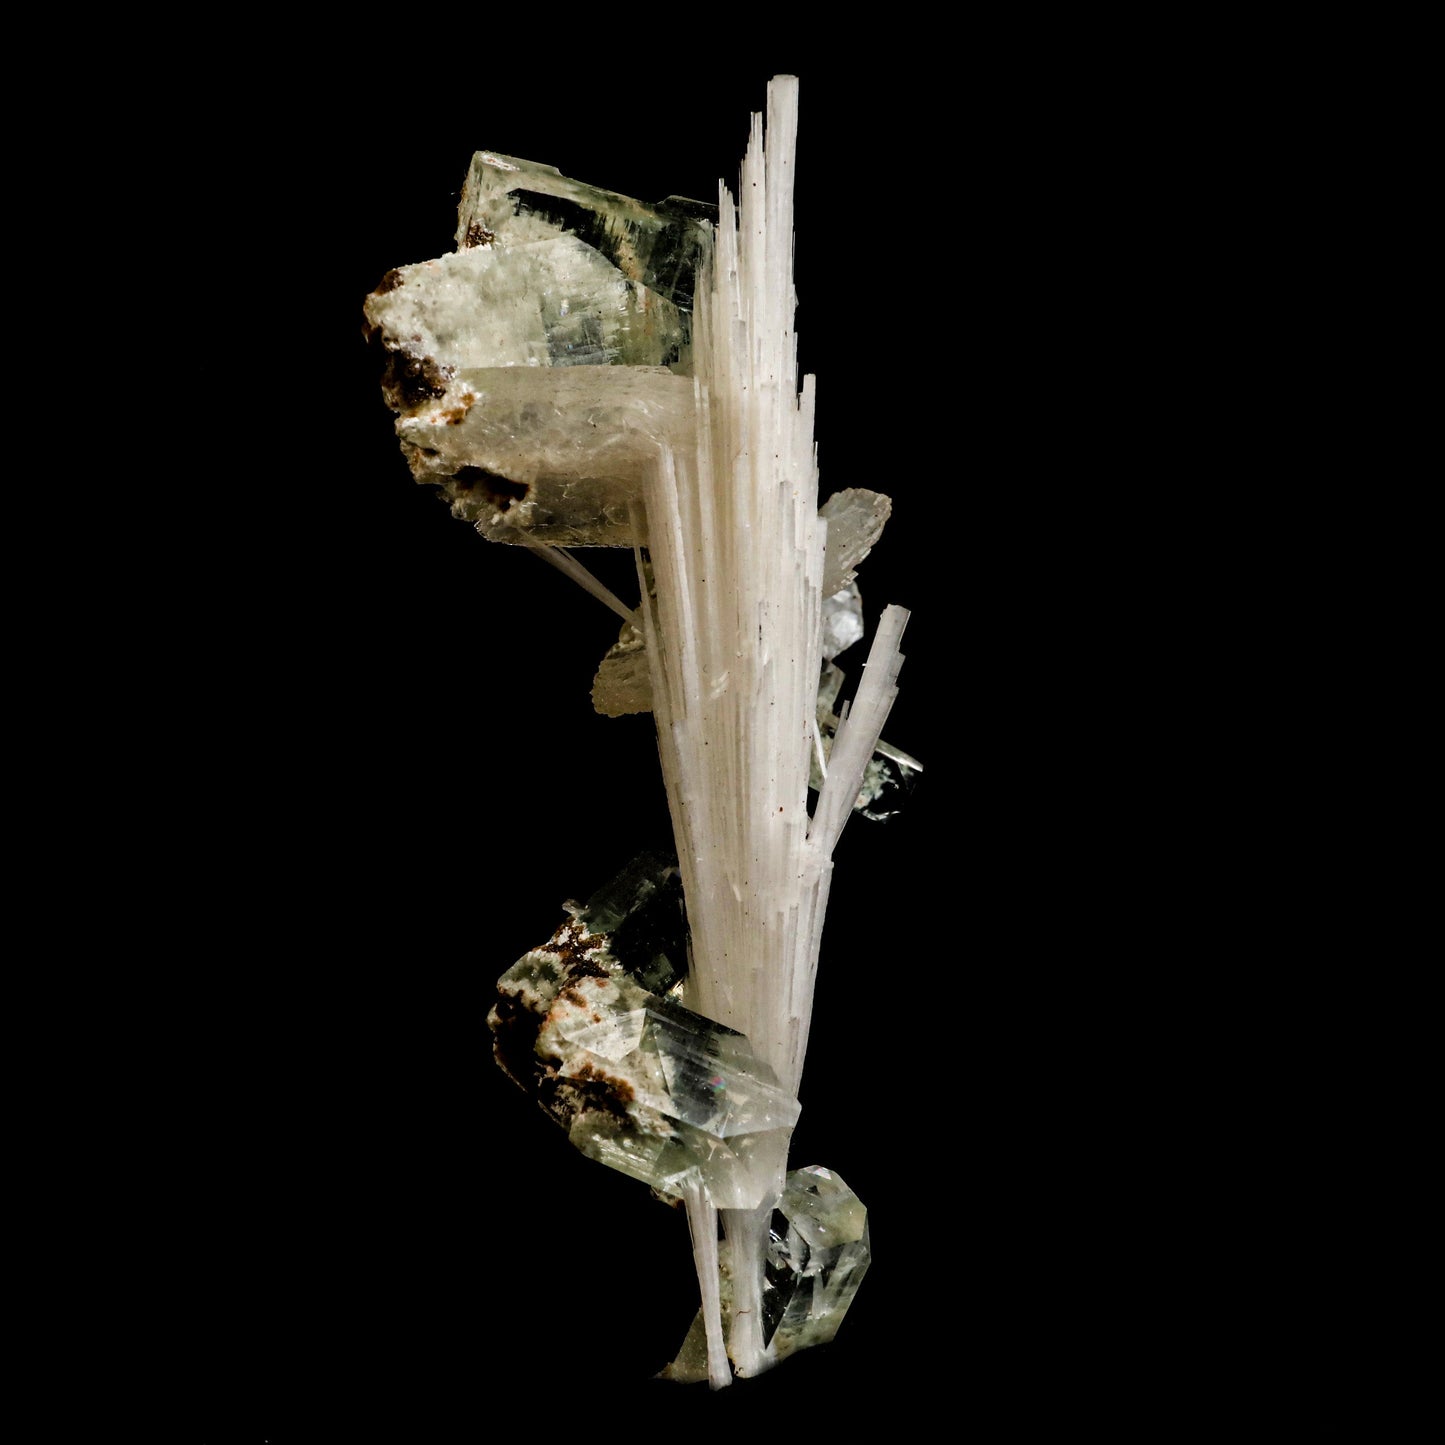 Green Apophyllite with Scolecite Sprays Natural Mineral Specimen # B …  https://www.superbminerals.us/products/green-apophyllite-with-scolecite-sprays-natural-mineral-specimen-b-5019  Features:&nbsp;A massive spray of elongated colourless Scolecite crystals. A little fragment of matrix is connected, along with a small Stilbite crystal and light green apophyllite crystals.Scolecite crystals have a glassy appearance and are highly translucent, with transparent terminations. 